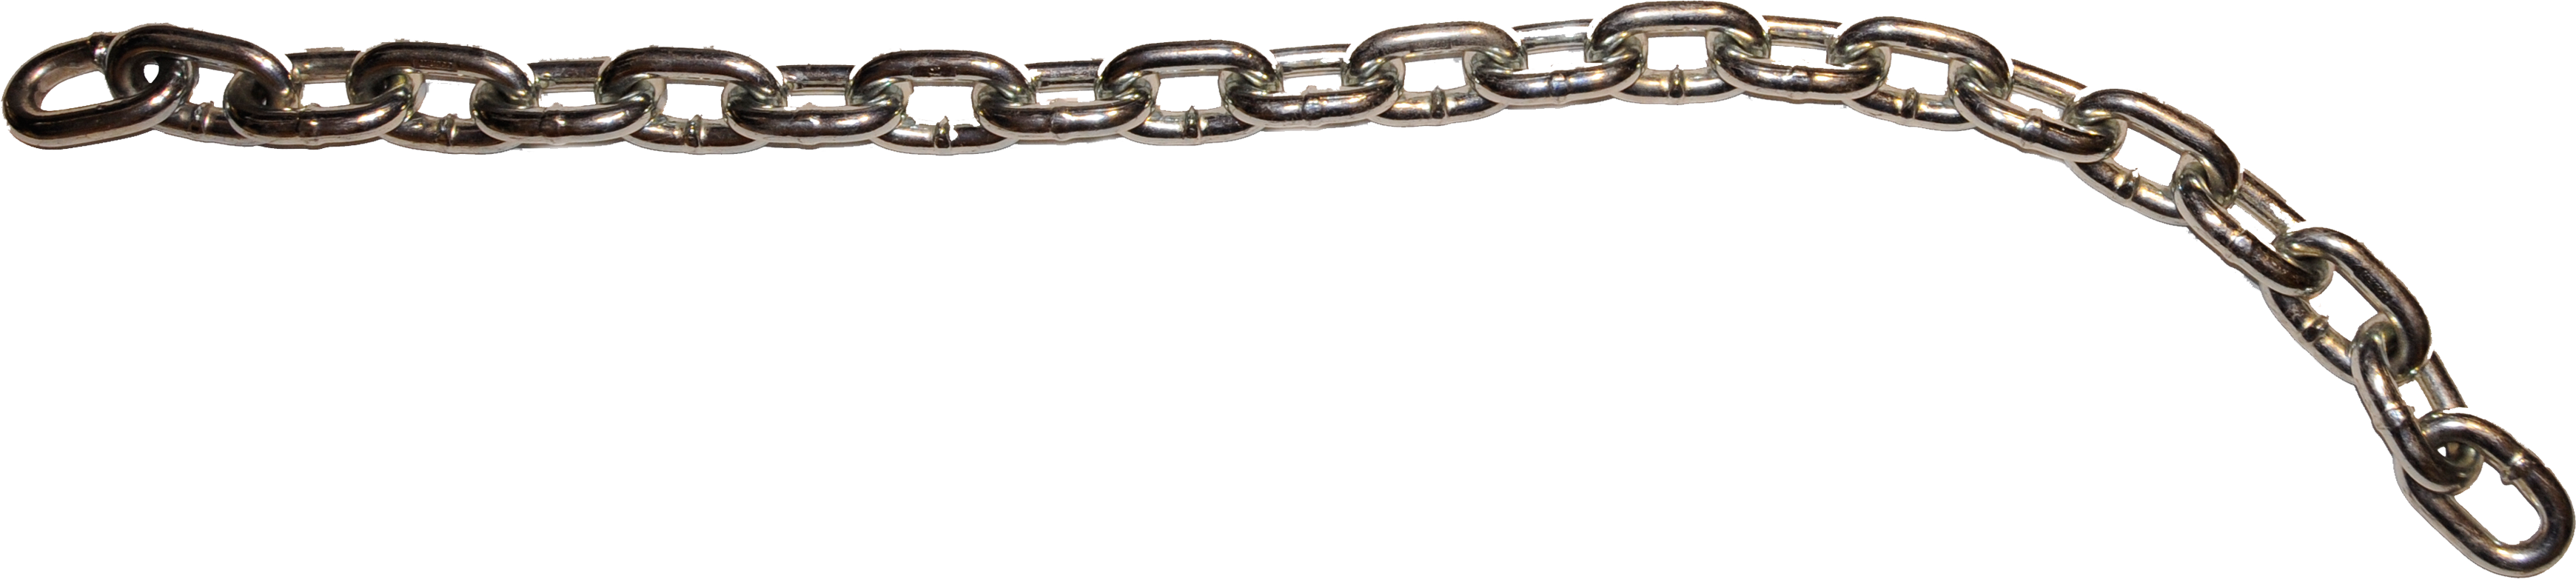 Dog Chain Tag PNG Images HD